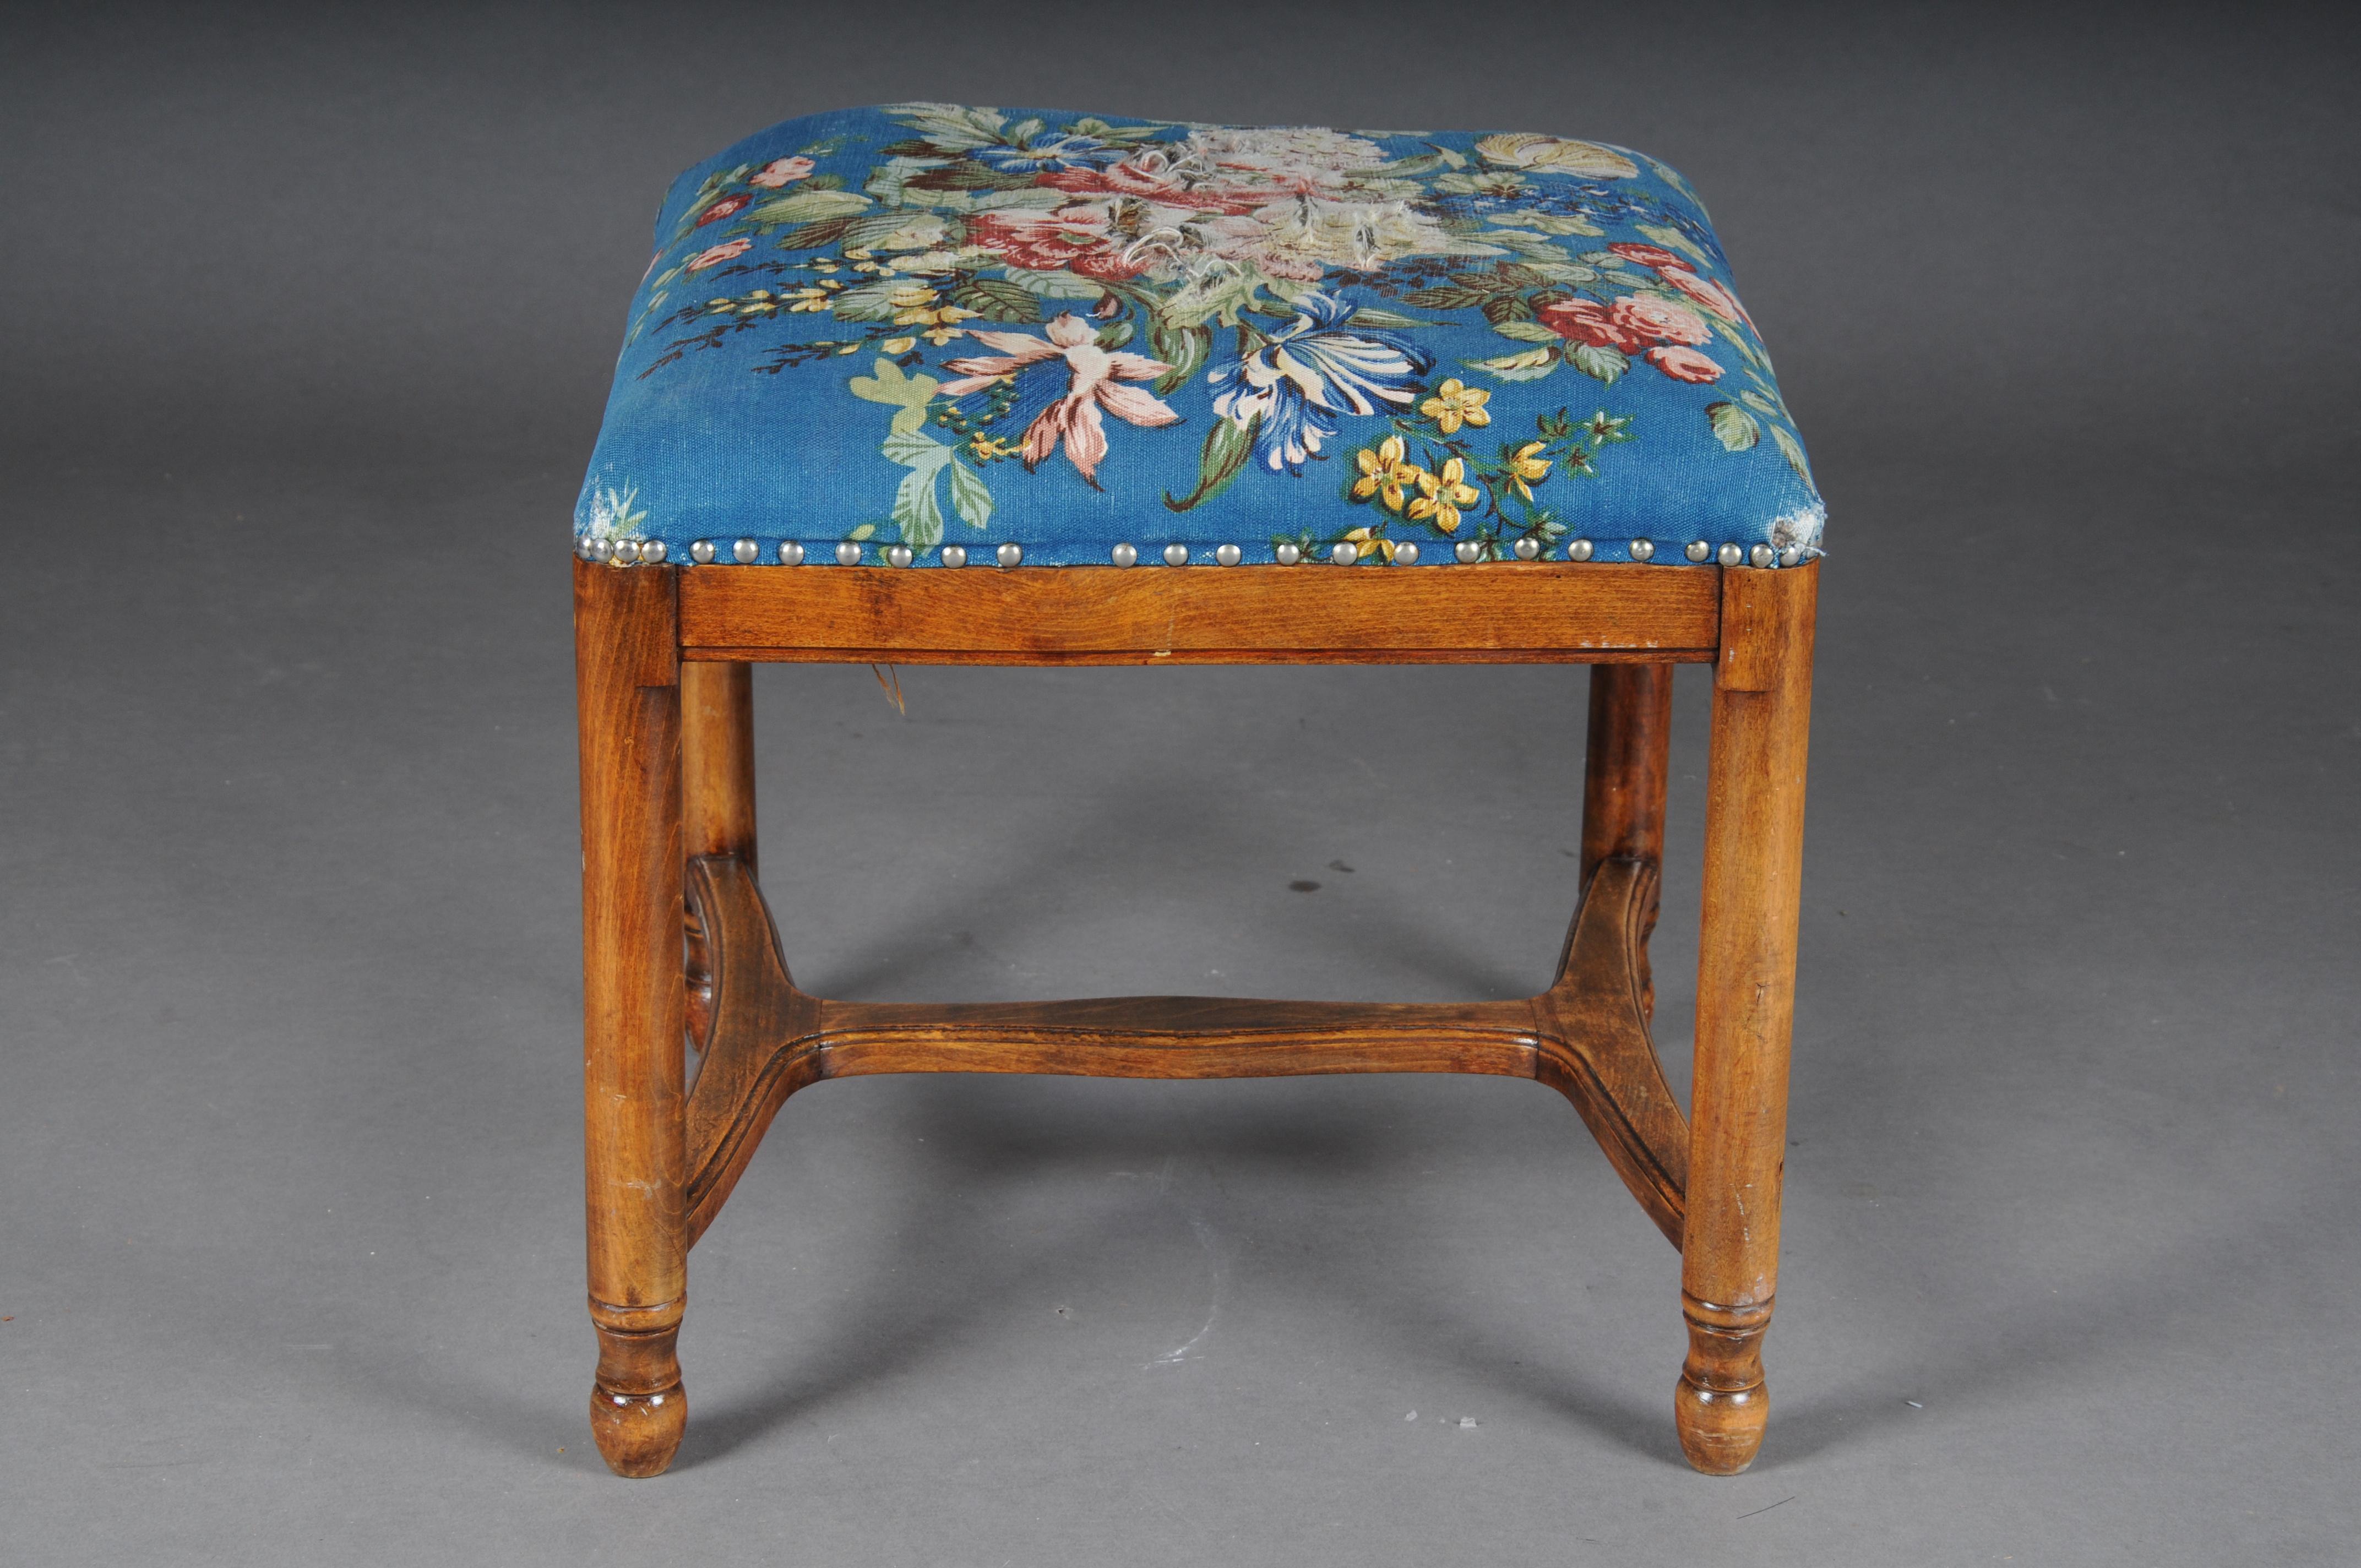 Antique classic oak stool, Germany, 19th. Century


Solid wood, square shape. Seat standing on four legs connected to a central bridge. Blue floral seat cover with elaborate innerspring upholstery. Germany 19th century